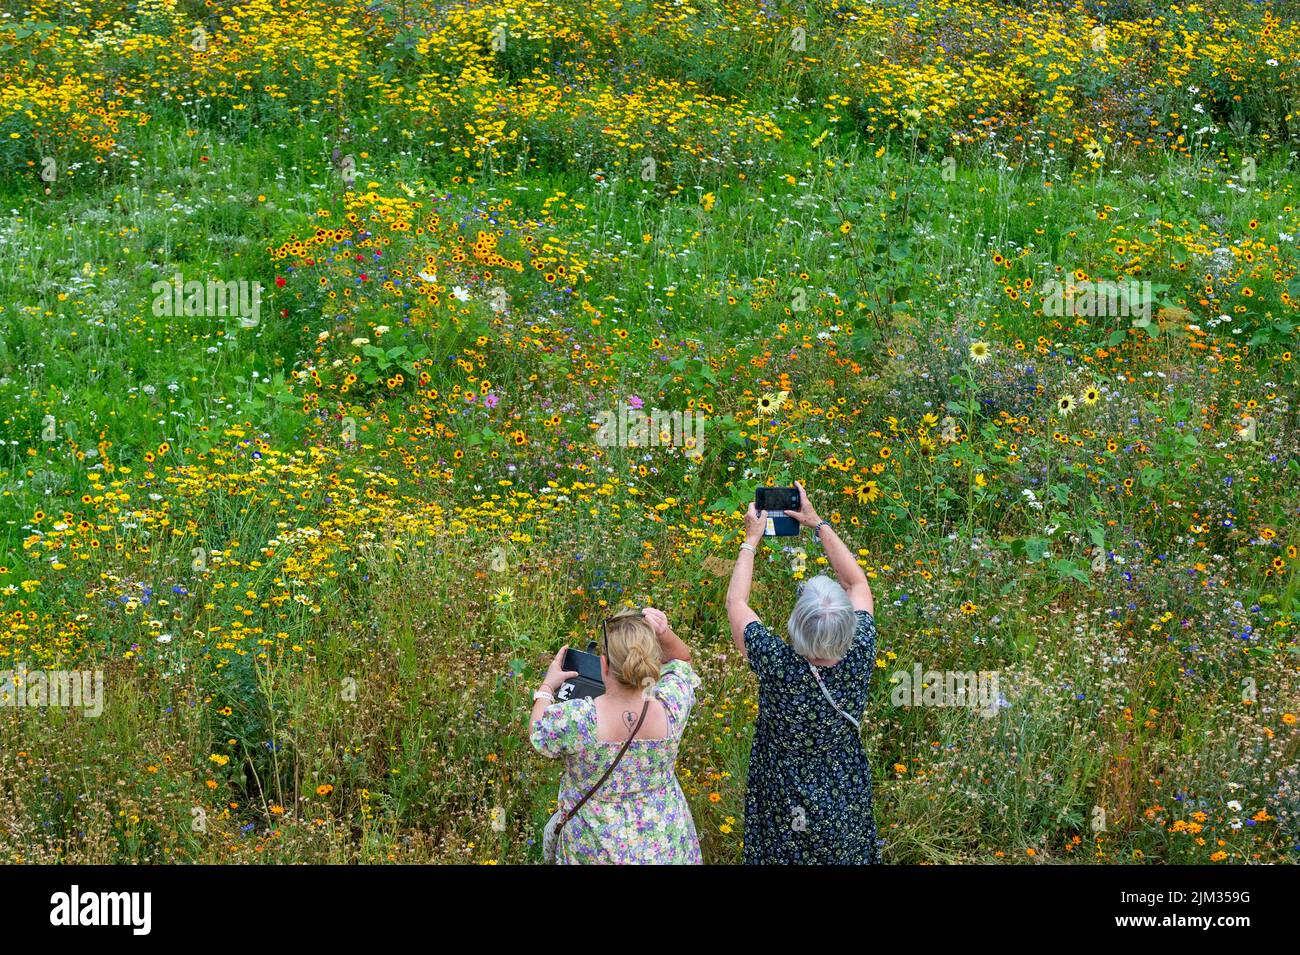 London, UK.  4 August 2022.  UK Weather - Visitors view Superbloom, a display of wildflowers in the moat of the Tower of London, grown from over 20 million seeds from 29 flower species which were sown to celebrate the Queen’s Platinum Jubilee. The flowers were chosen to attract a variety of pollinators to create a new biodiverse habitat.  As the current unusually dry conditions continue, with drought warnings in certain places, a modest sprinkler system is just managing to keep the flowers in bloom.  Credit: Stephen Chung / Alamy Live News Stock Photo